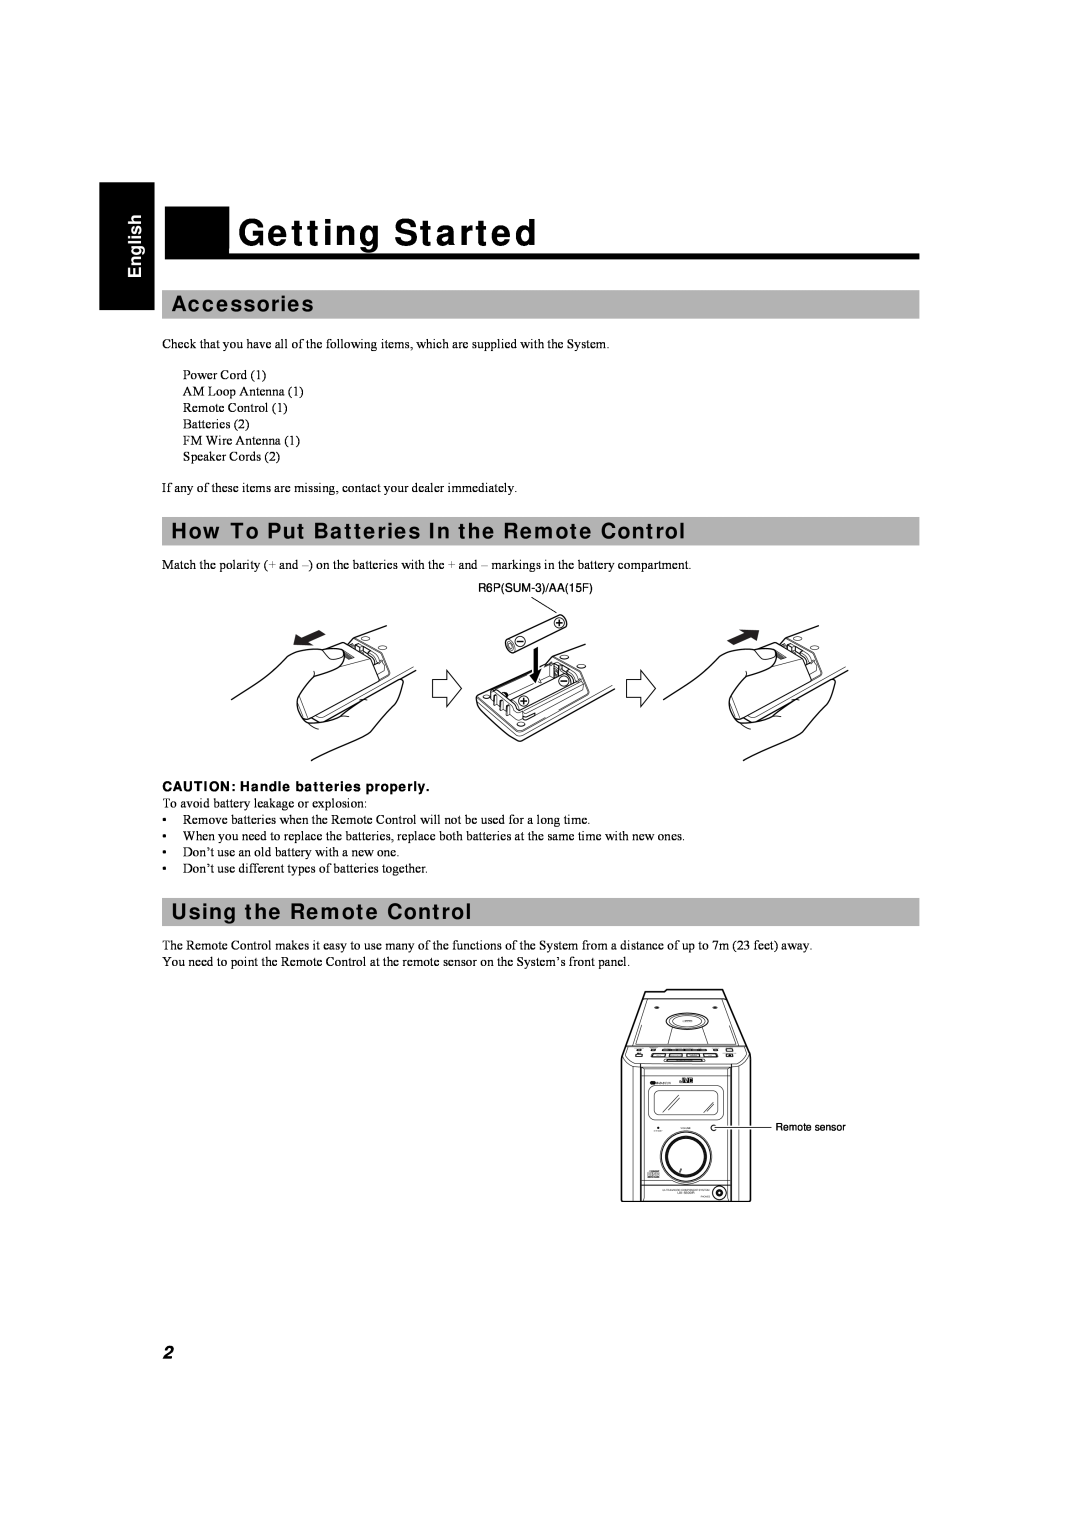 JVC LVT0084-001A manual Getting Started, Accessories, How To Put Batteries In the Remote Control, Using the Remote Control 